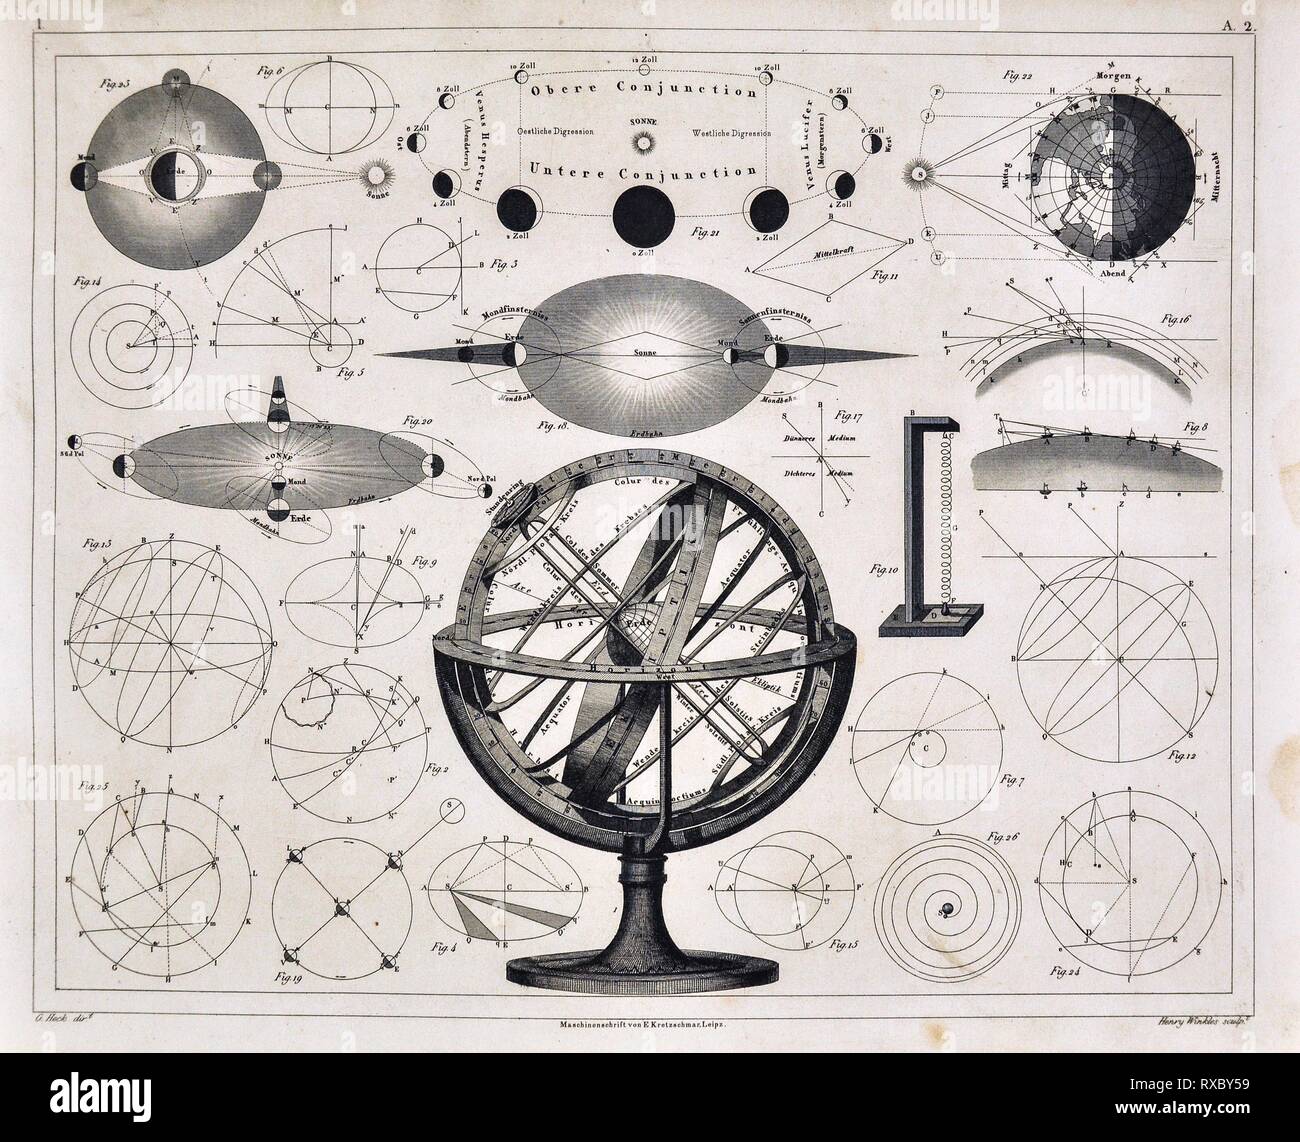 1849 Bilder Astronomy Print with an Armillary Sphere or Antique Model of the Solar System and the affects of the Sun, Moon and Earth on Eclipses and Physical diagrams regarding Rotations and Orbits Stock Photo